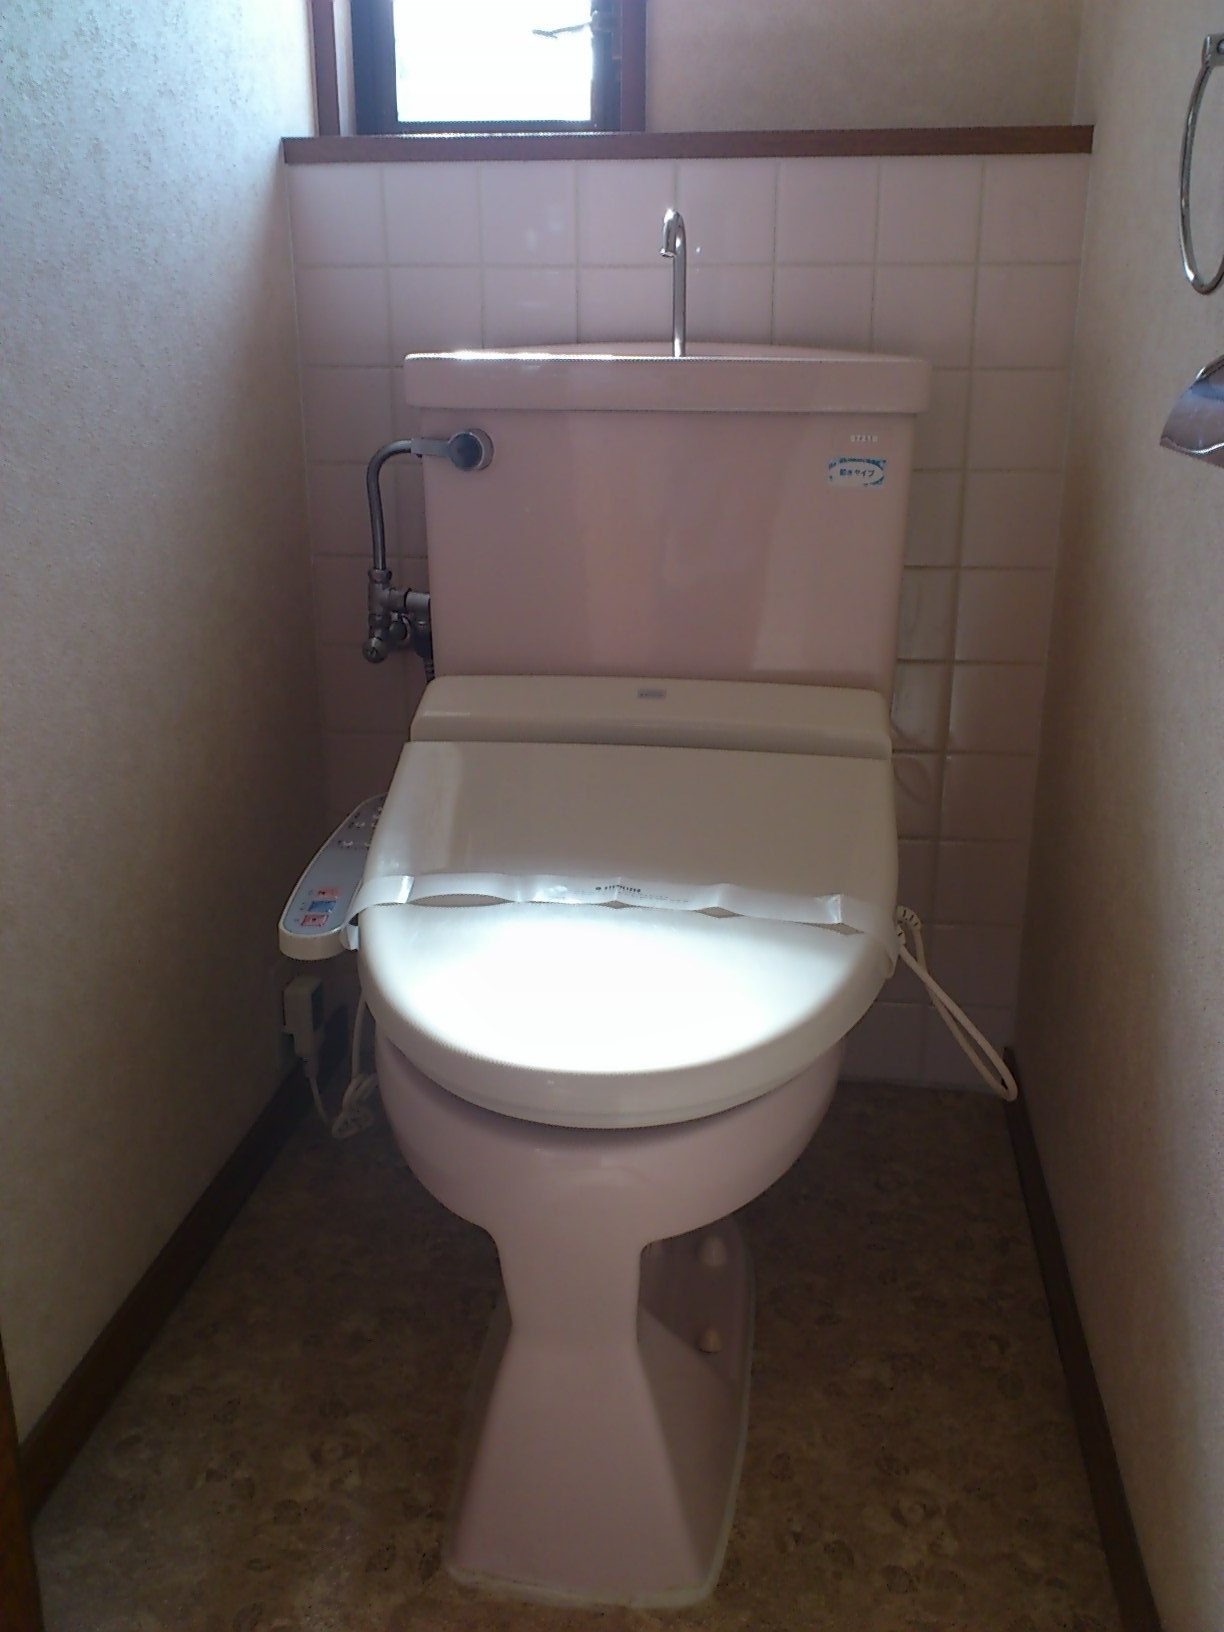 Toilet. Attach hot water cleaning toilet seat on arrival